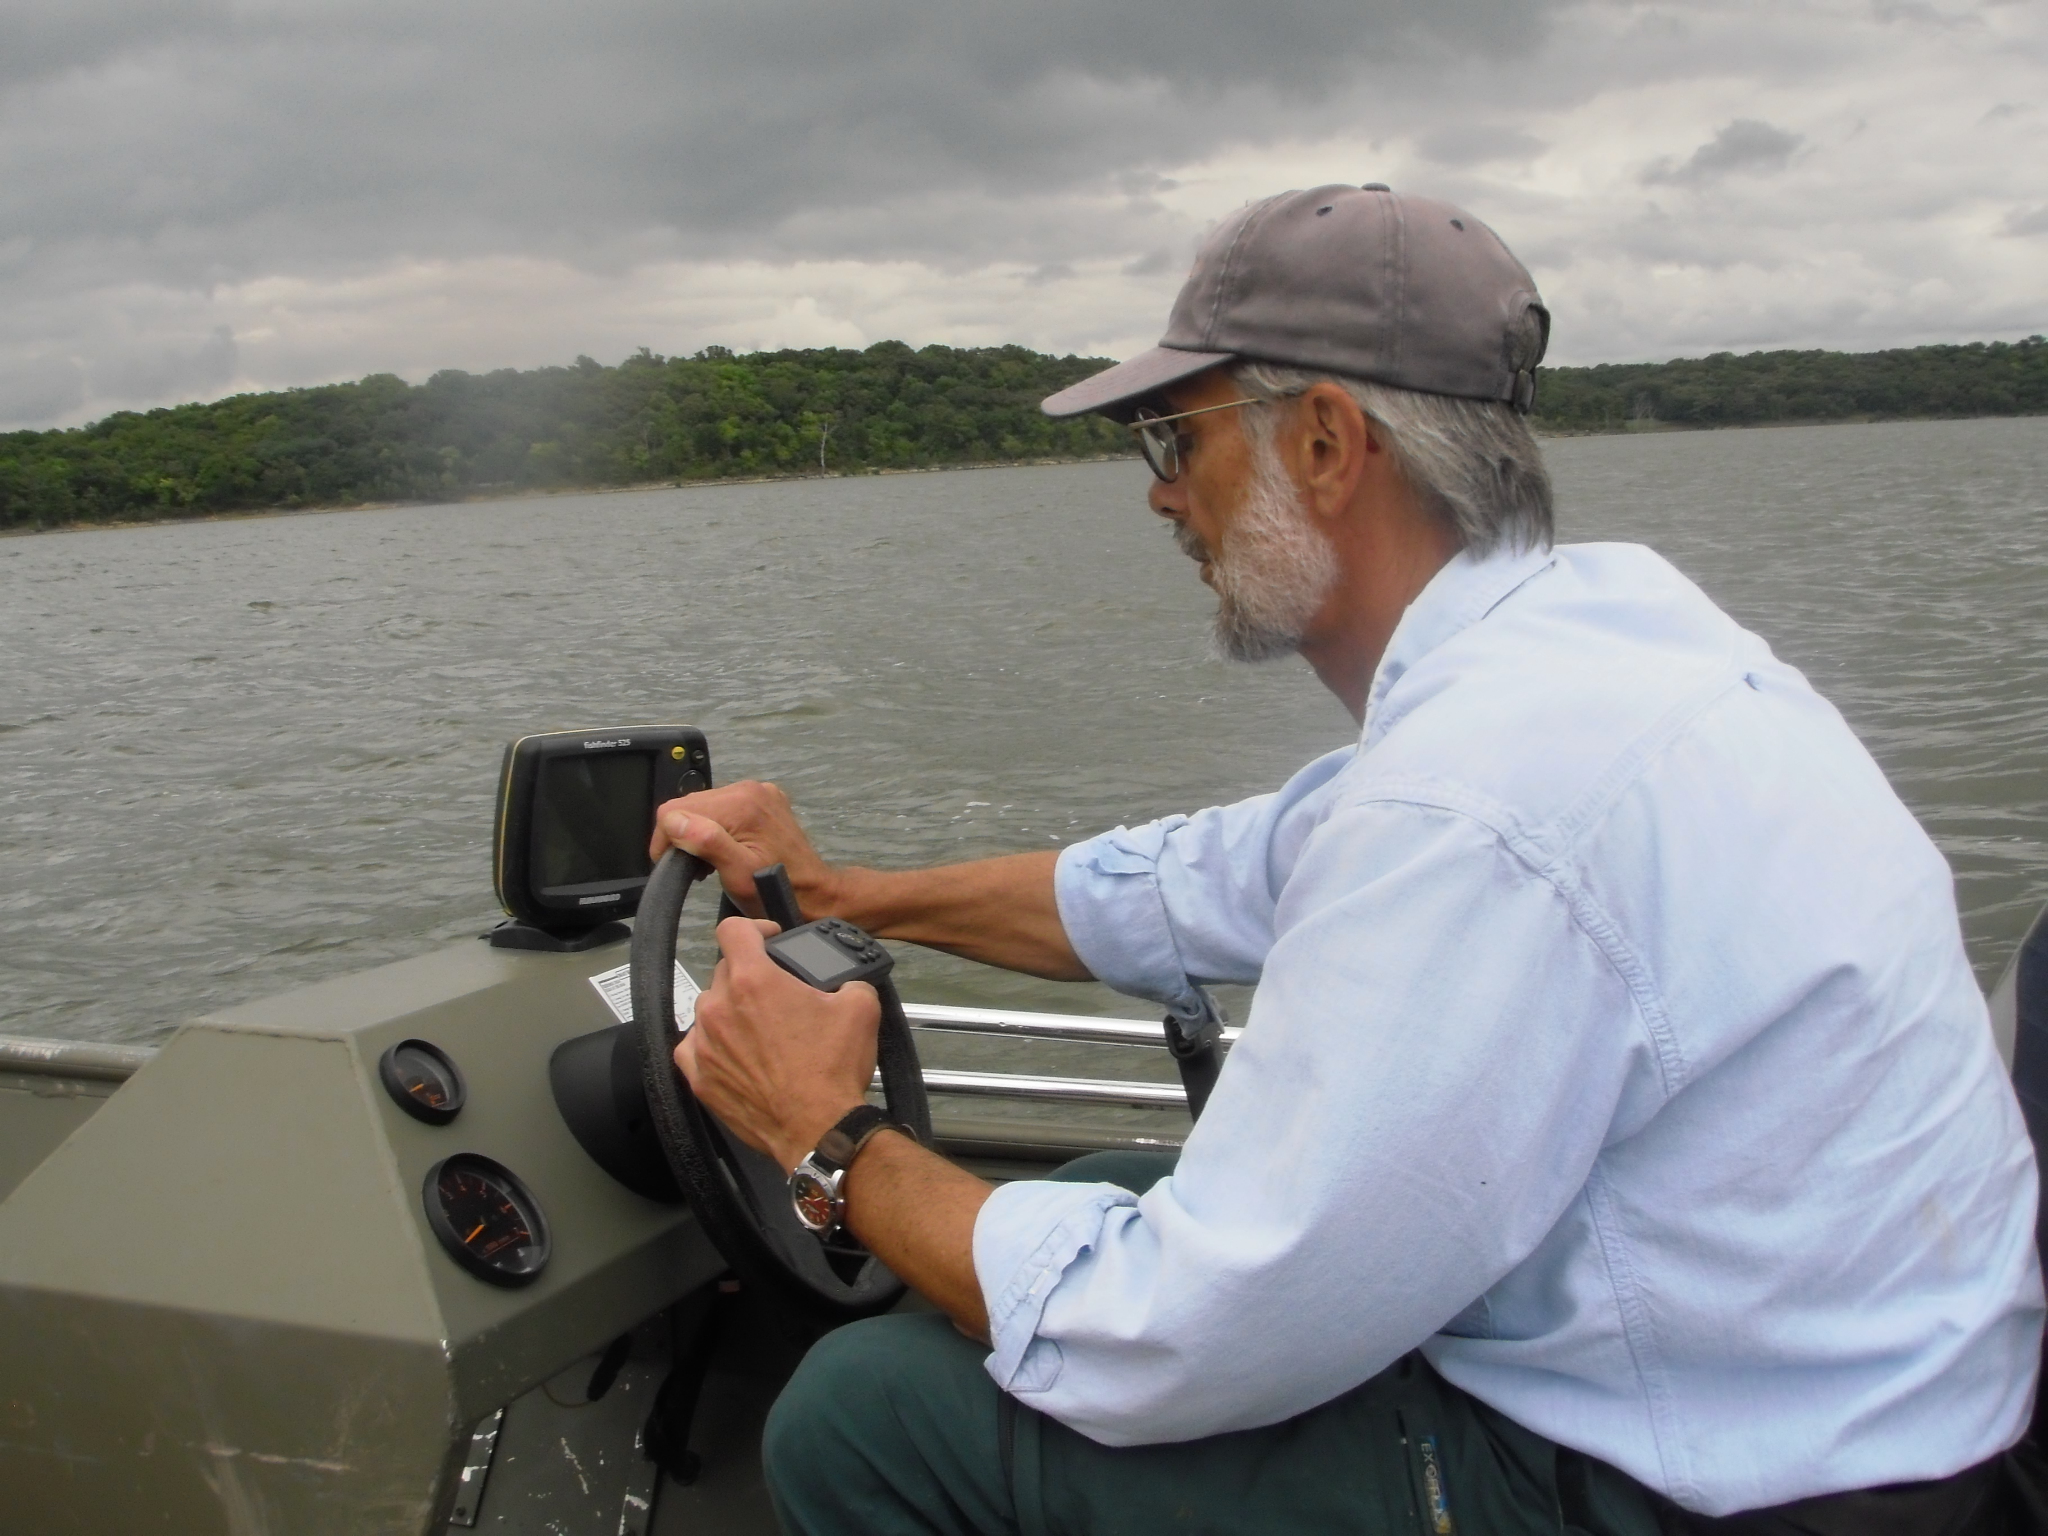 Paul Liechti driving the boat on Clinton Lake in 2009.